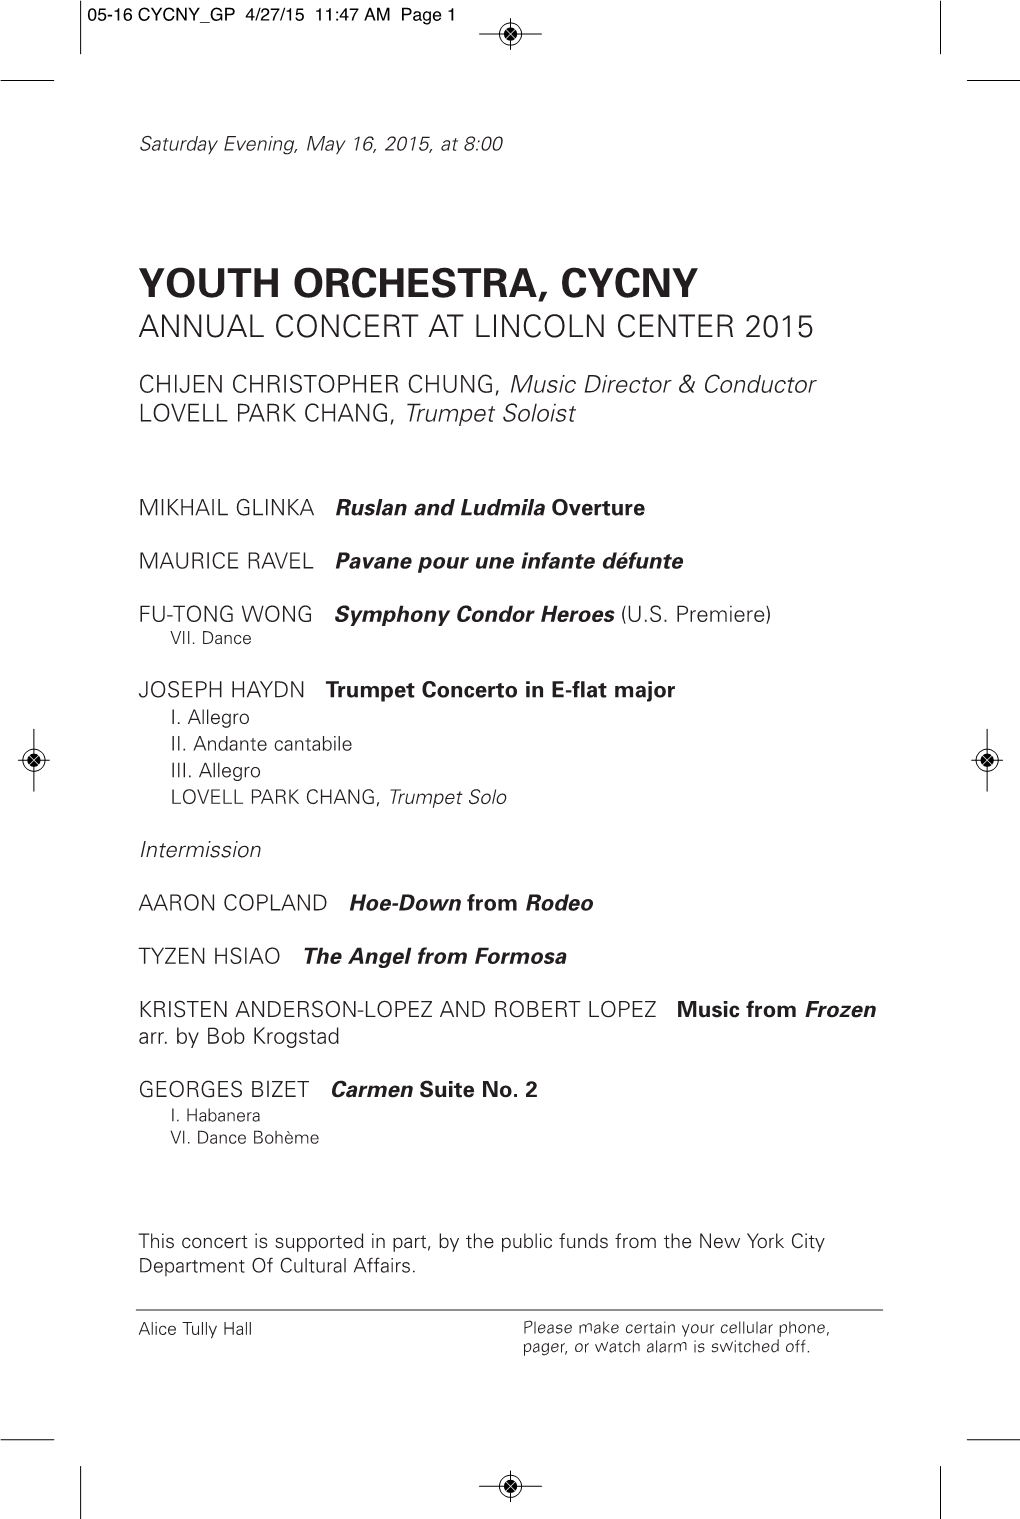 Youth Orchestra, Cycny Annual Concert at Lincoln Center 2015